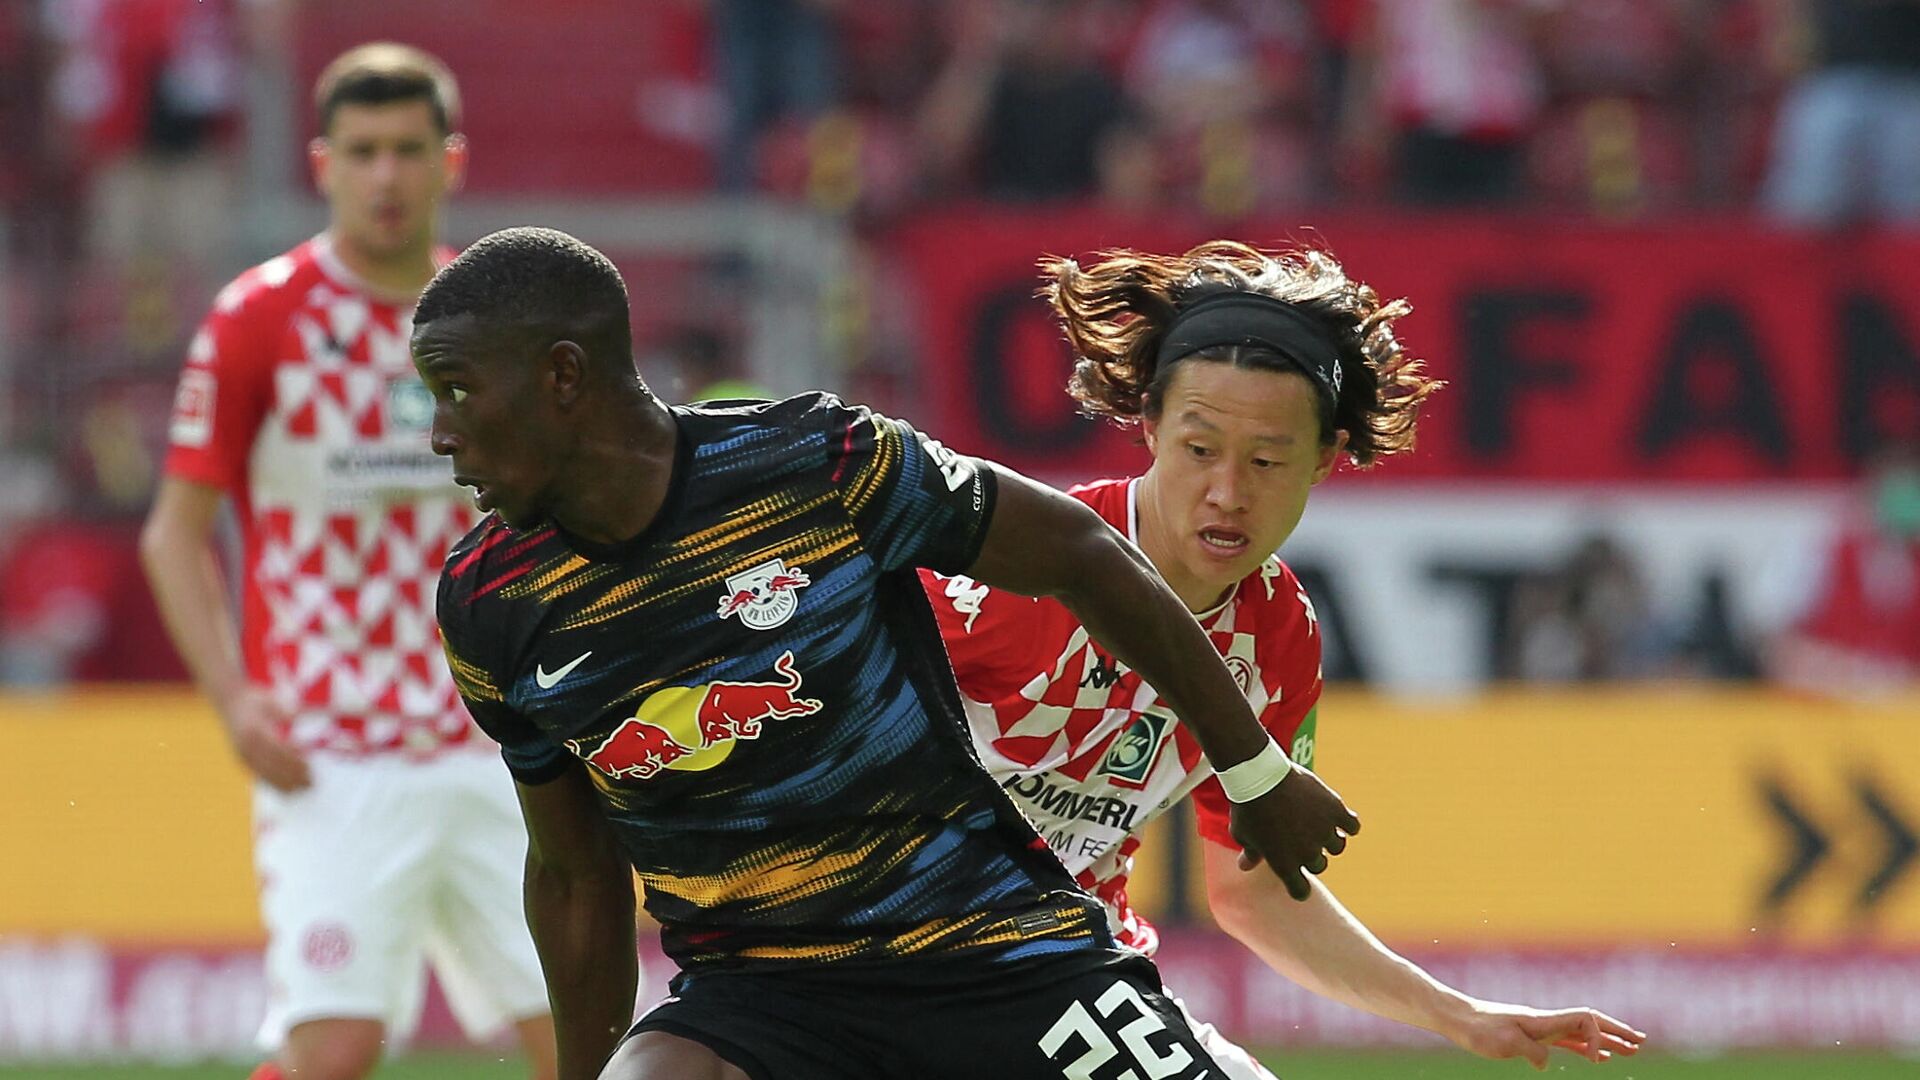 Mainz' Korean midfielder Jae-Sung Lee (R) and Leipzig's French defender Nordi Mukiele vie for the ball during the German first division Bundesliga football match between FSV Mainz 05 and RB Leipzig in Mainz, western Germany, on August 15, 2021. (Photo by Daniel ROLAND / AFP) / DFL REGULATIONS PROHIBIT ANY USE OF PHOTOGRAPHS AS IMAGE SEQUENCES AND/OR QUASI-VIDEO - РИА Новости, 1920, 15.08.2021